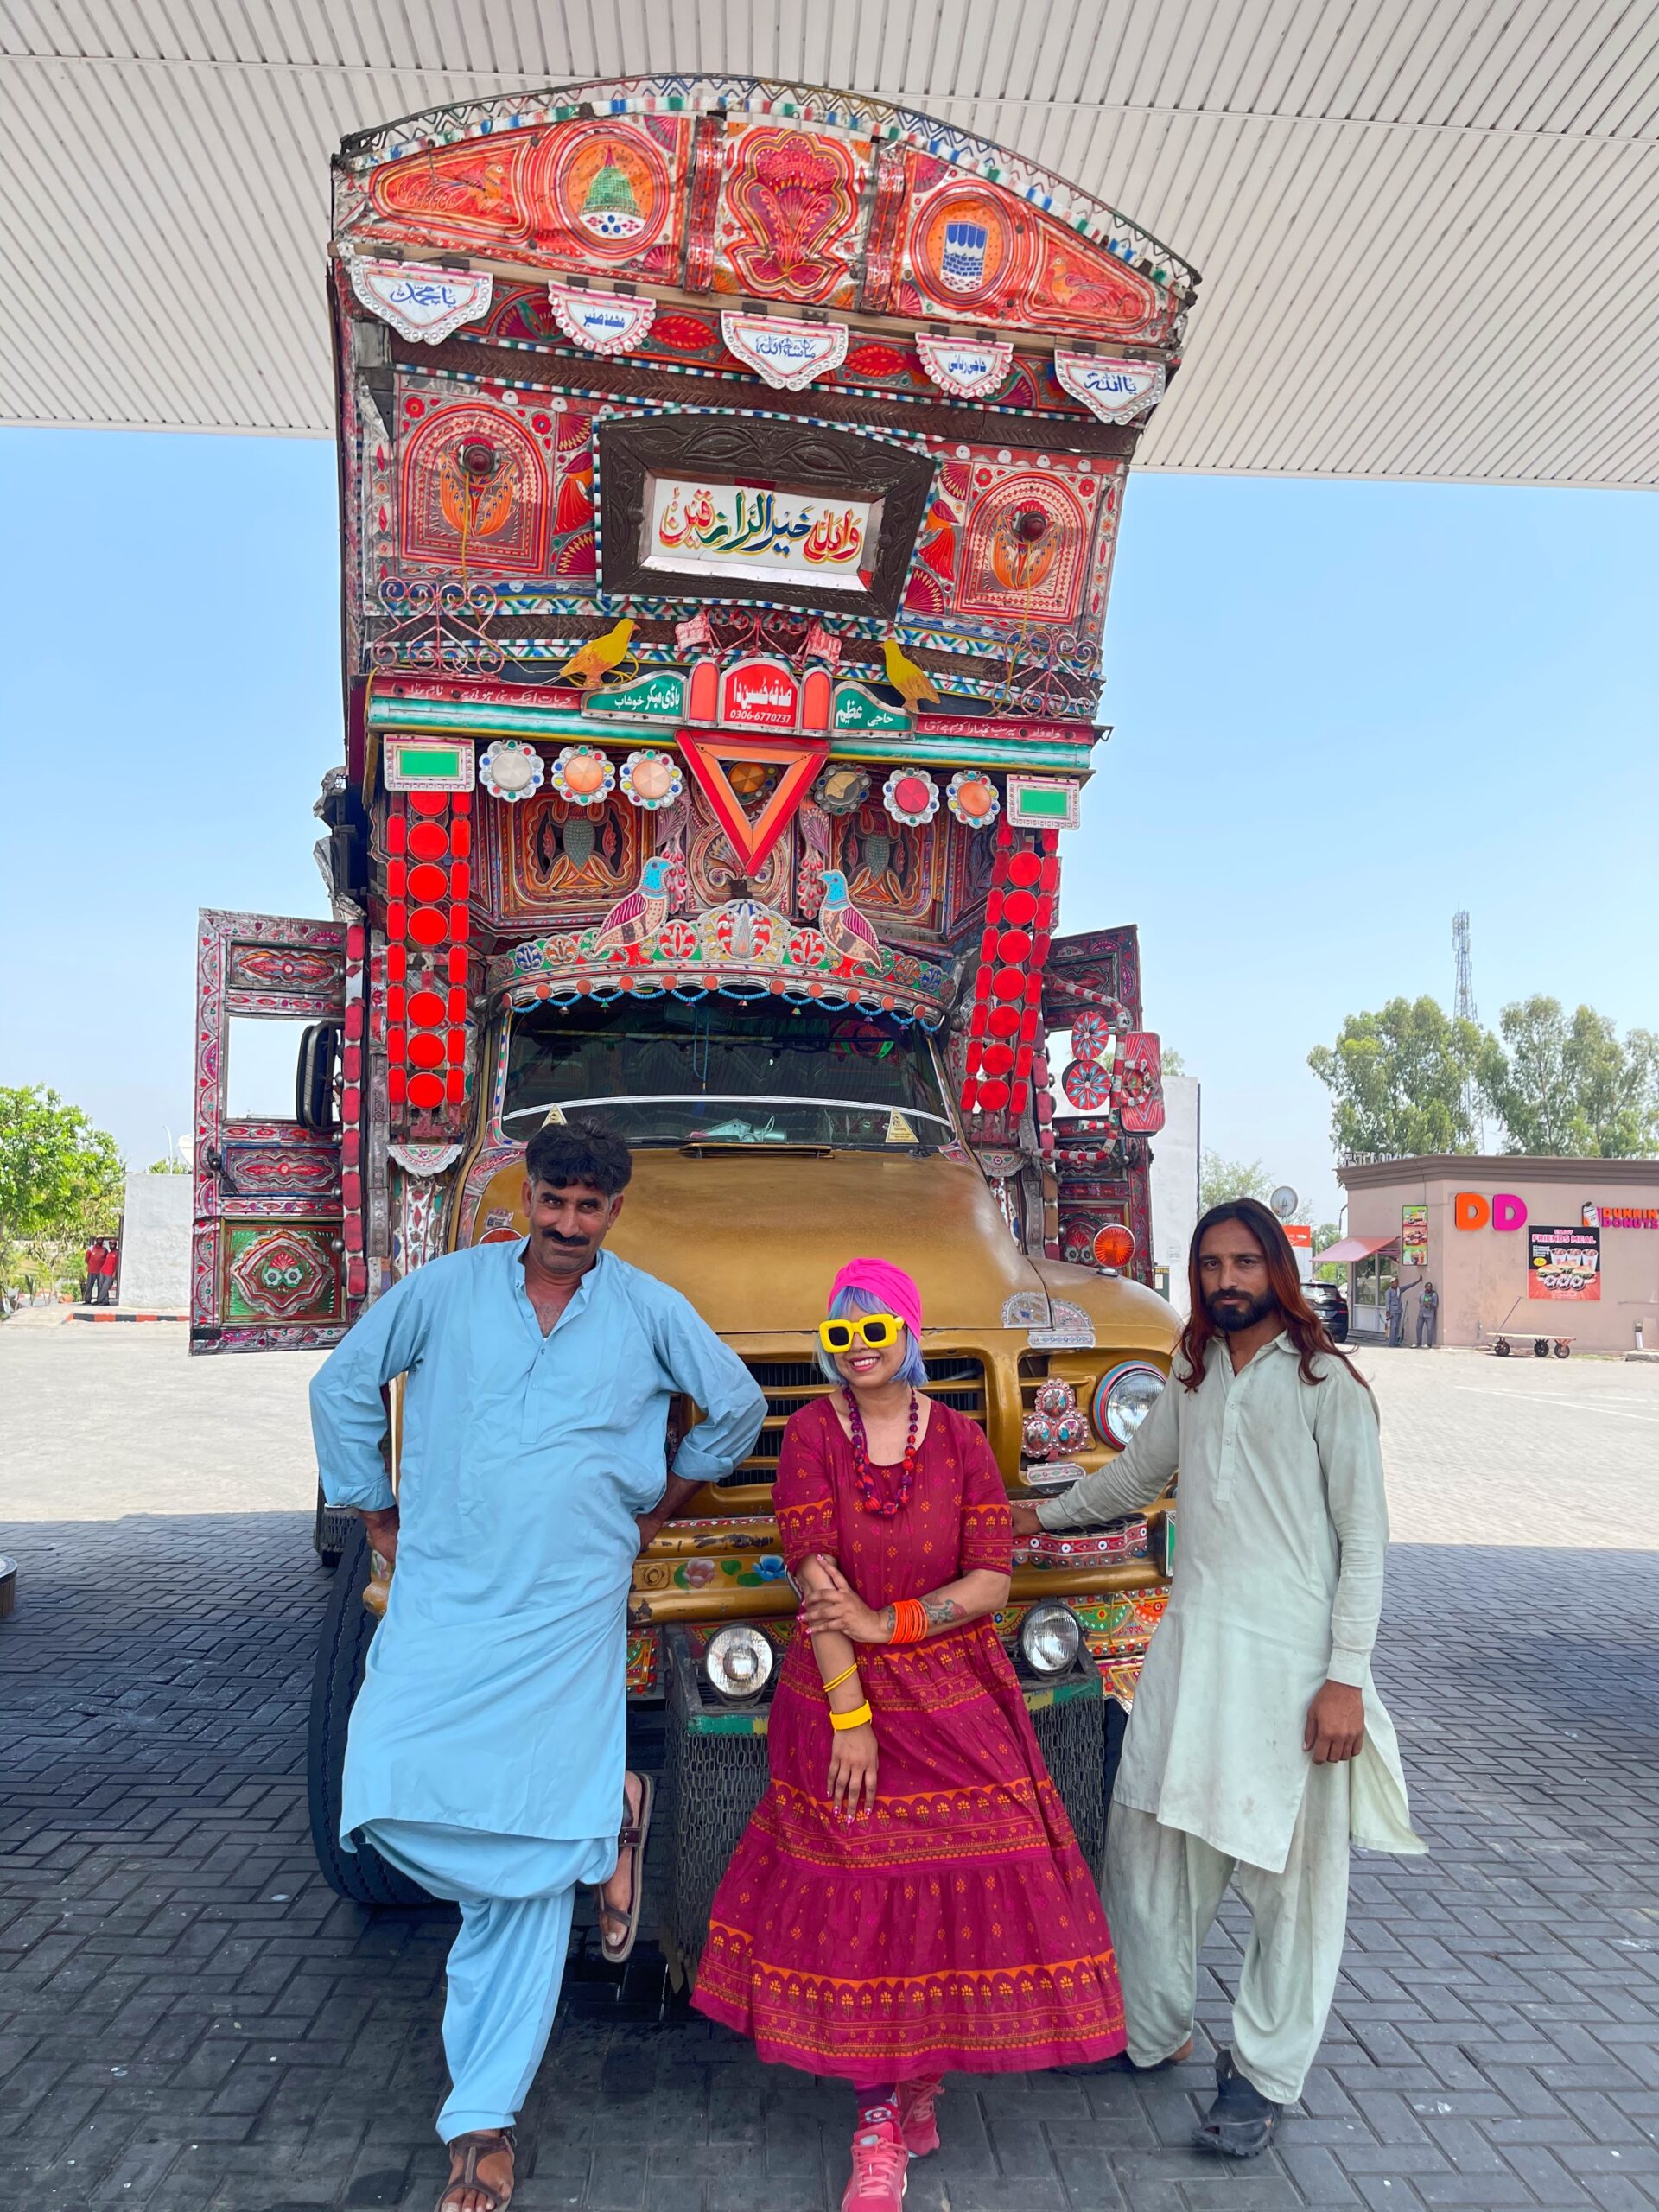 a traditional pakistan truck, driver and assistant beside it